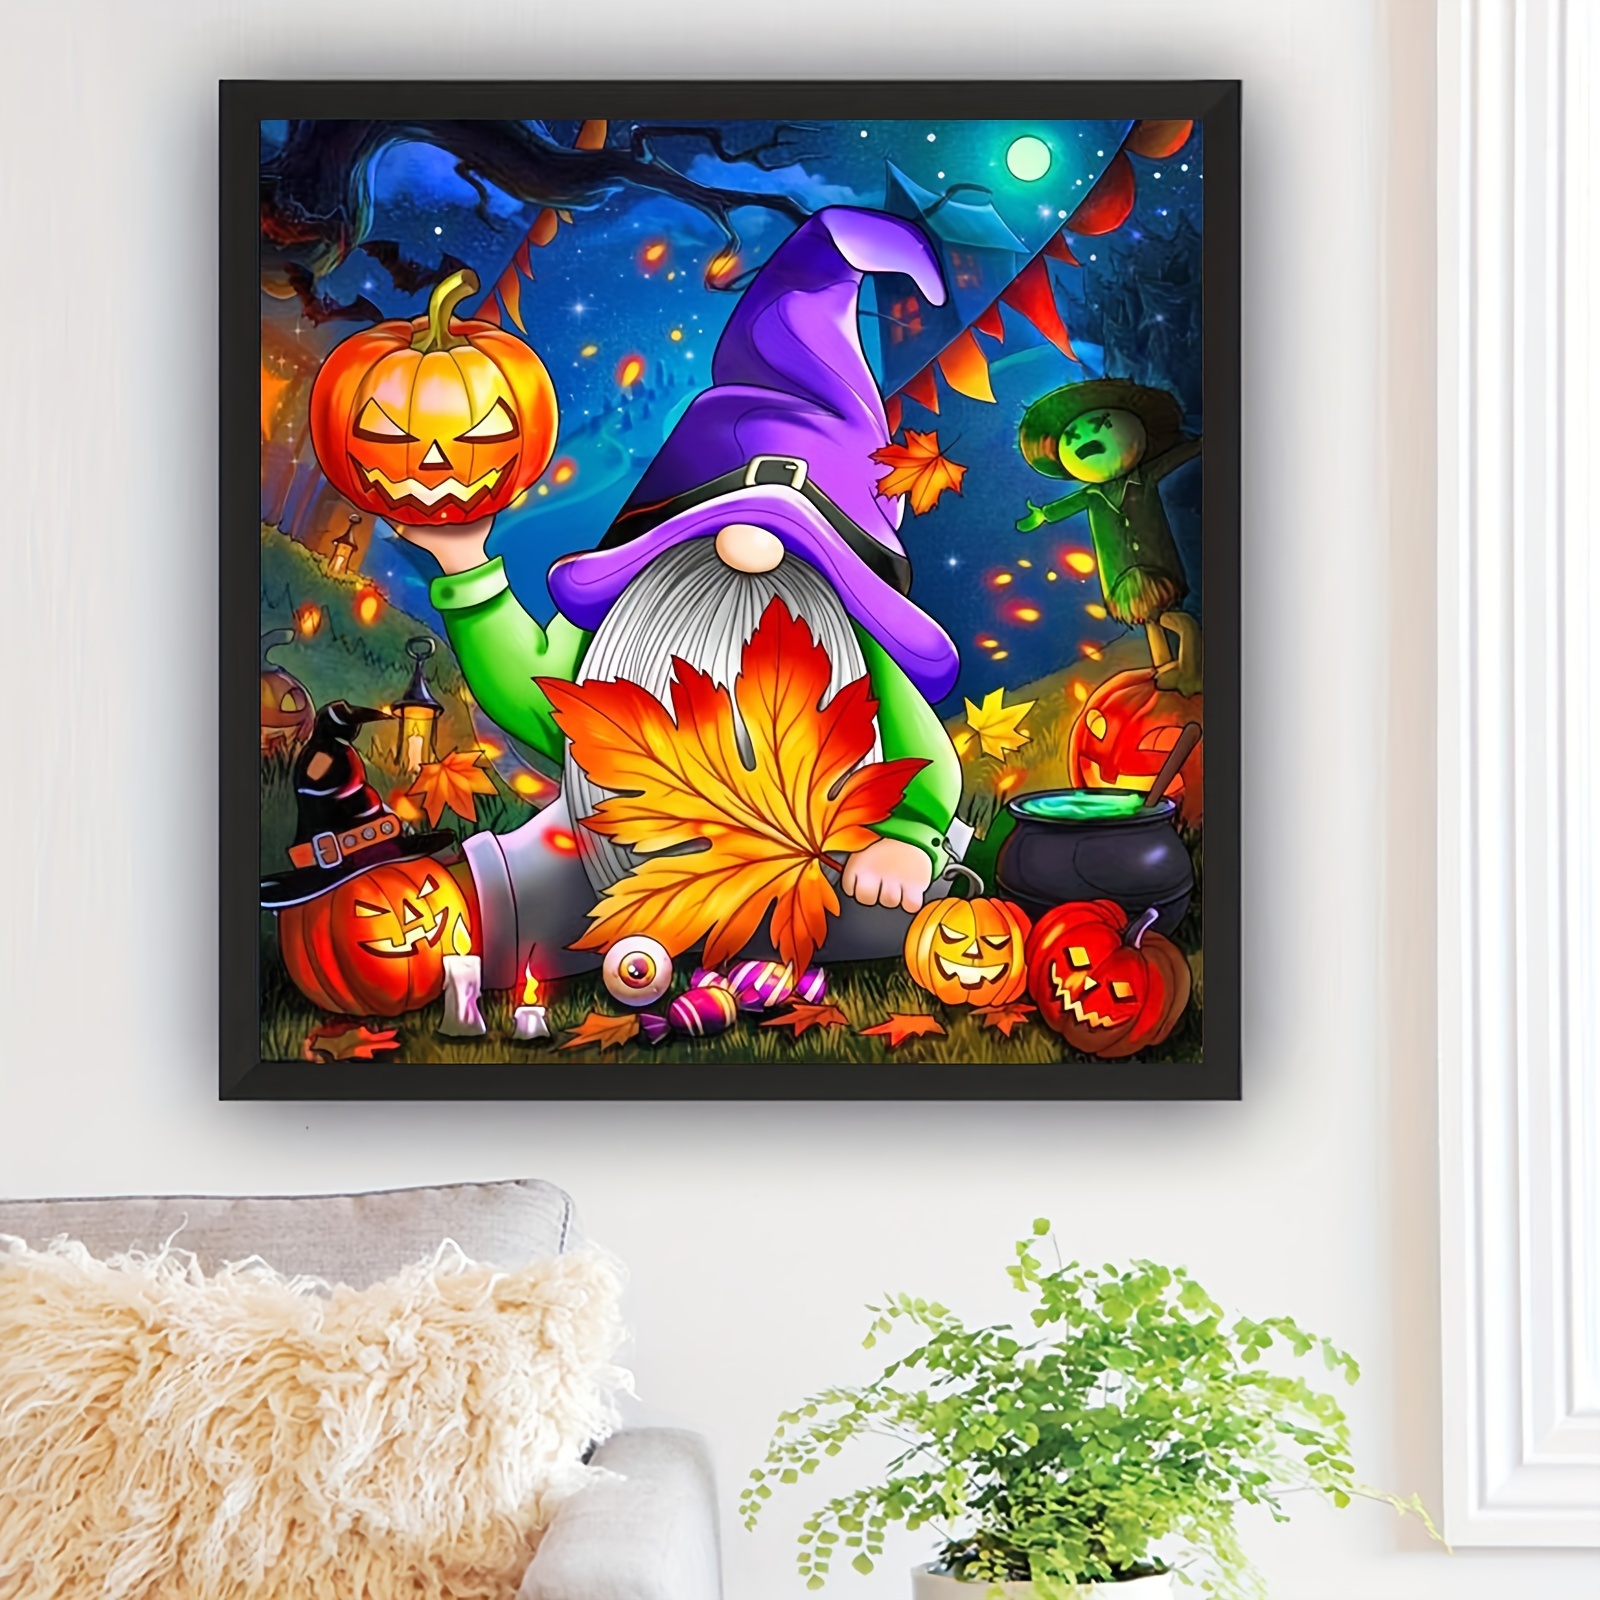 Halloween Diamond Painting Kits for Adults -Beginner DIY 5D Full Drill  Diamond Painting Kits for Kids with Pumkin Diamond Painting Dots Diamonds  Gem Art and Crafts for Adults Home Wall Decor by